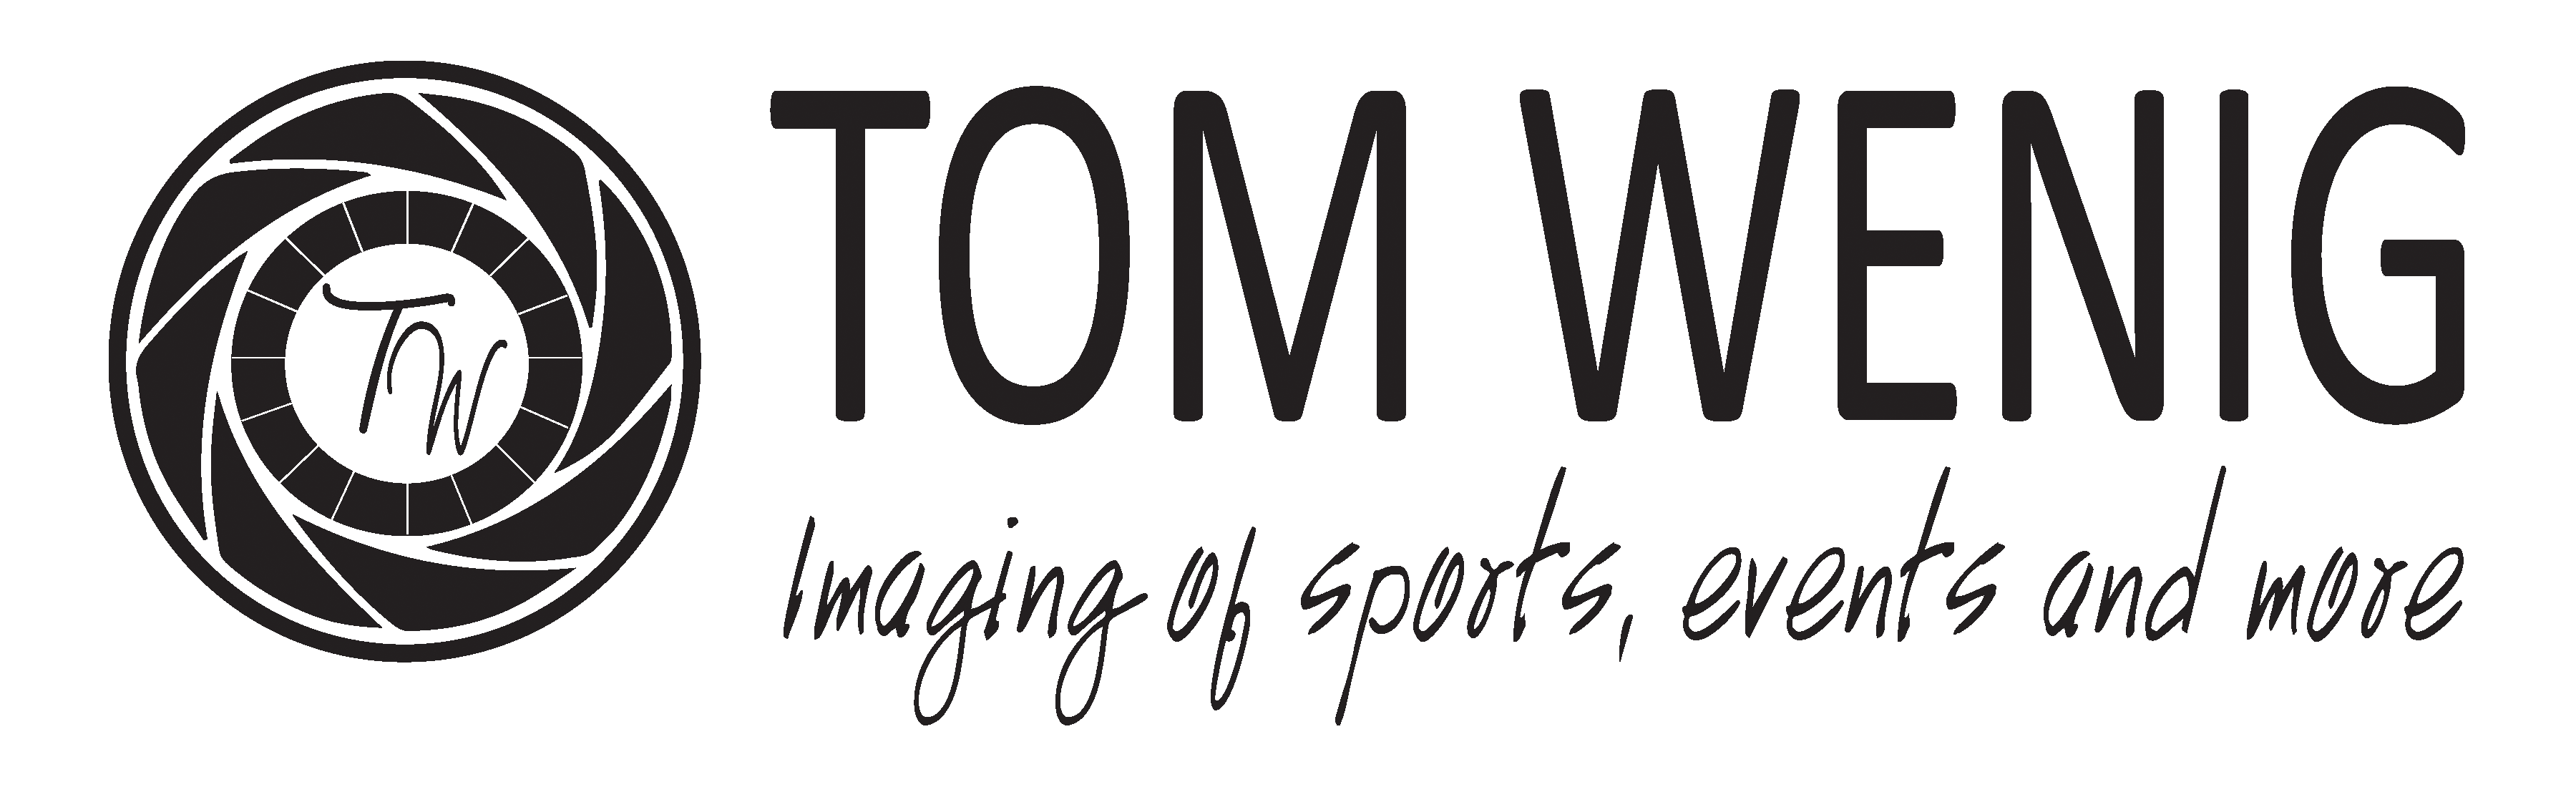 Tom Wenig - Imaging of sports, events and more